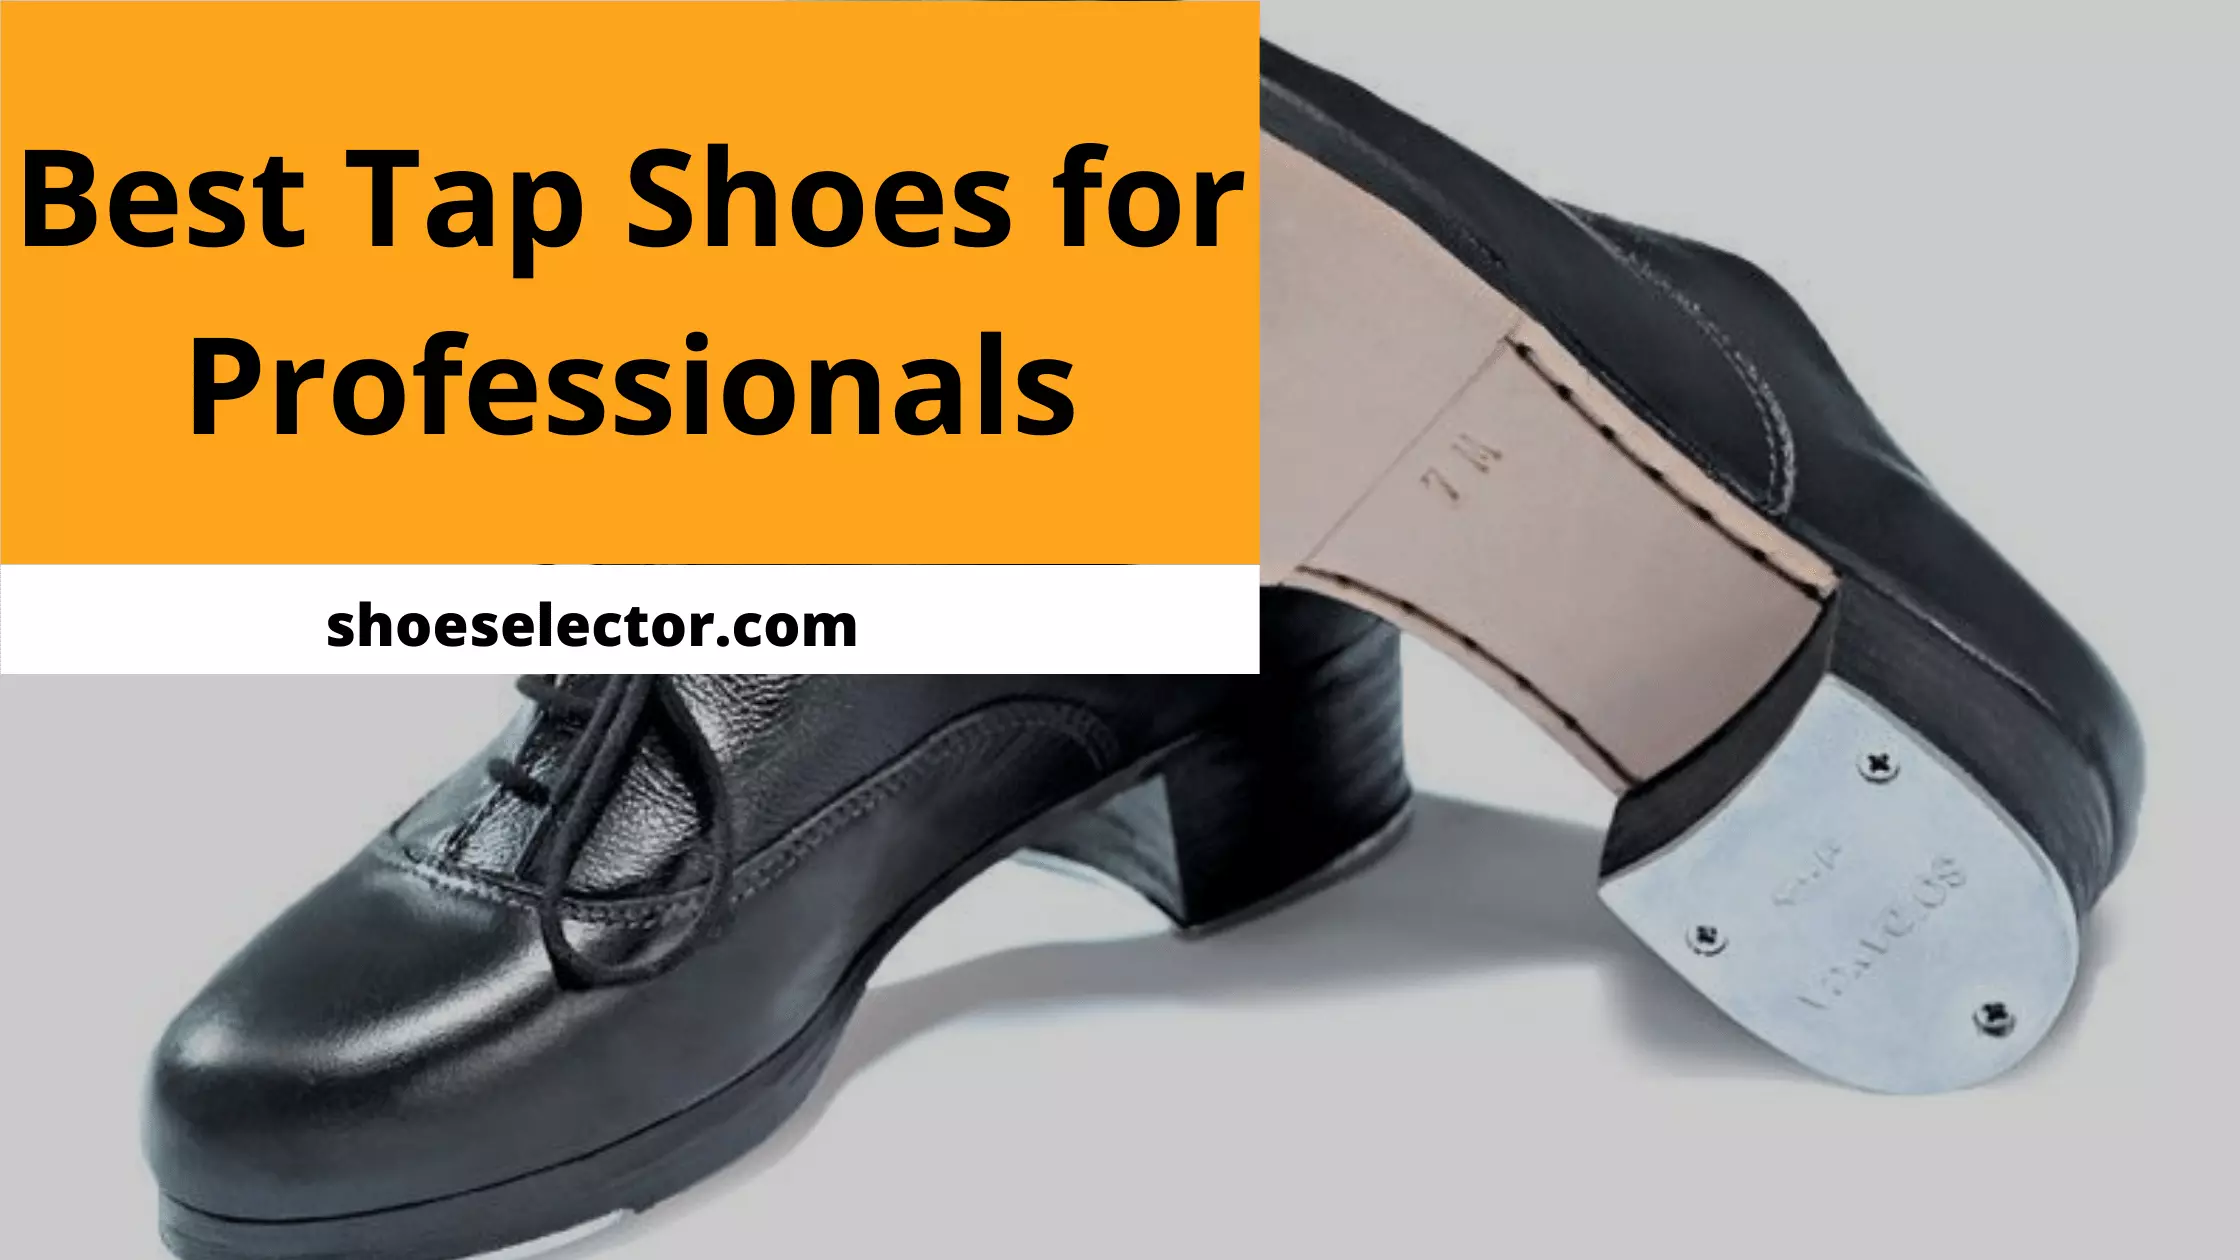 Best Tap Shoes for Professionals Reviews & Buying Guide